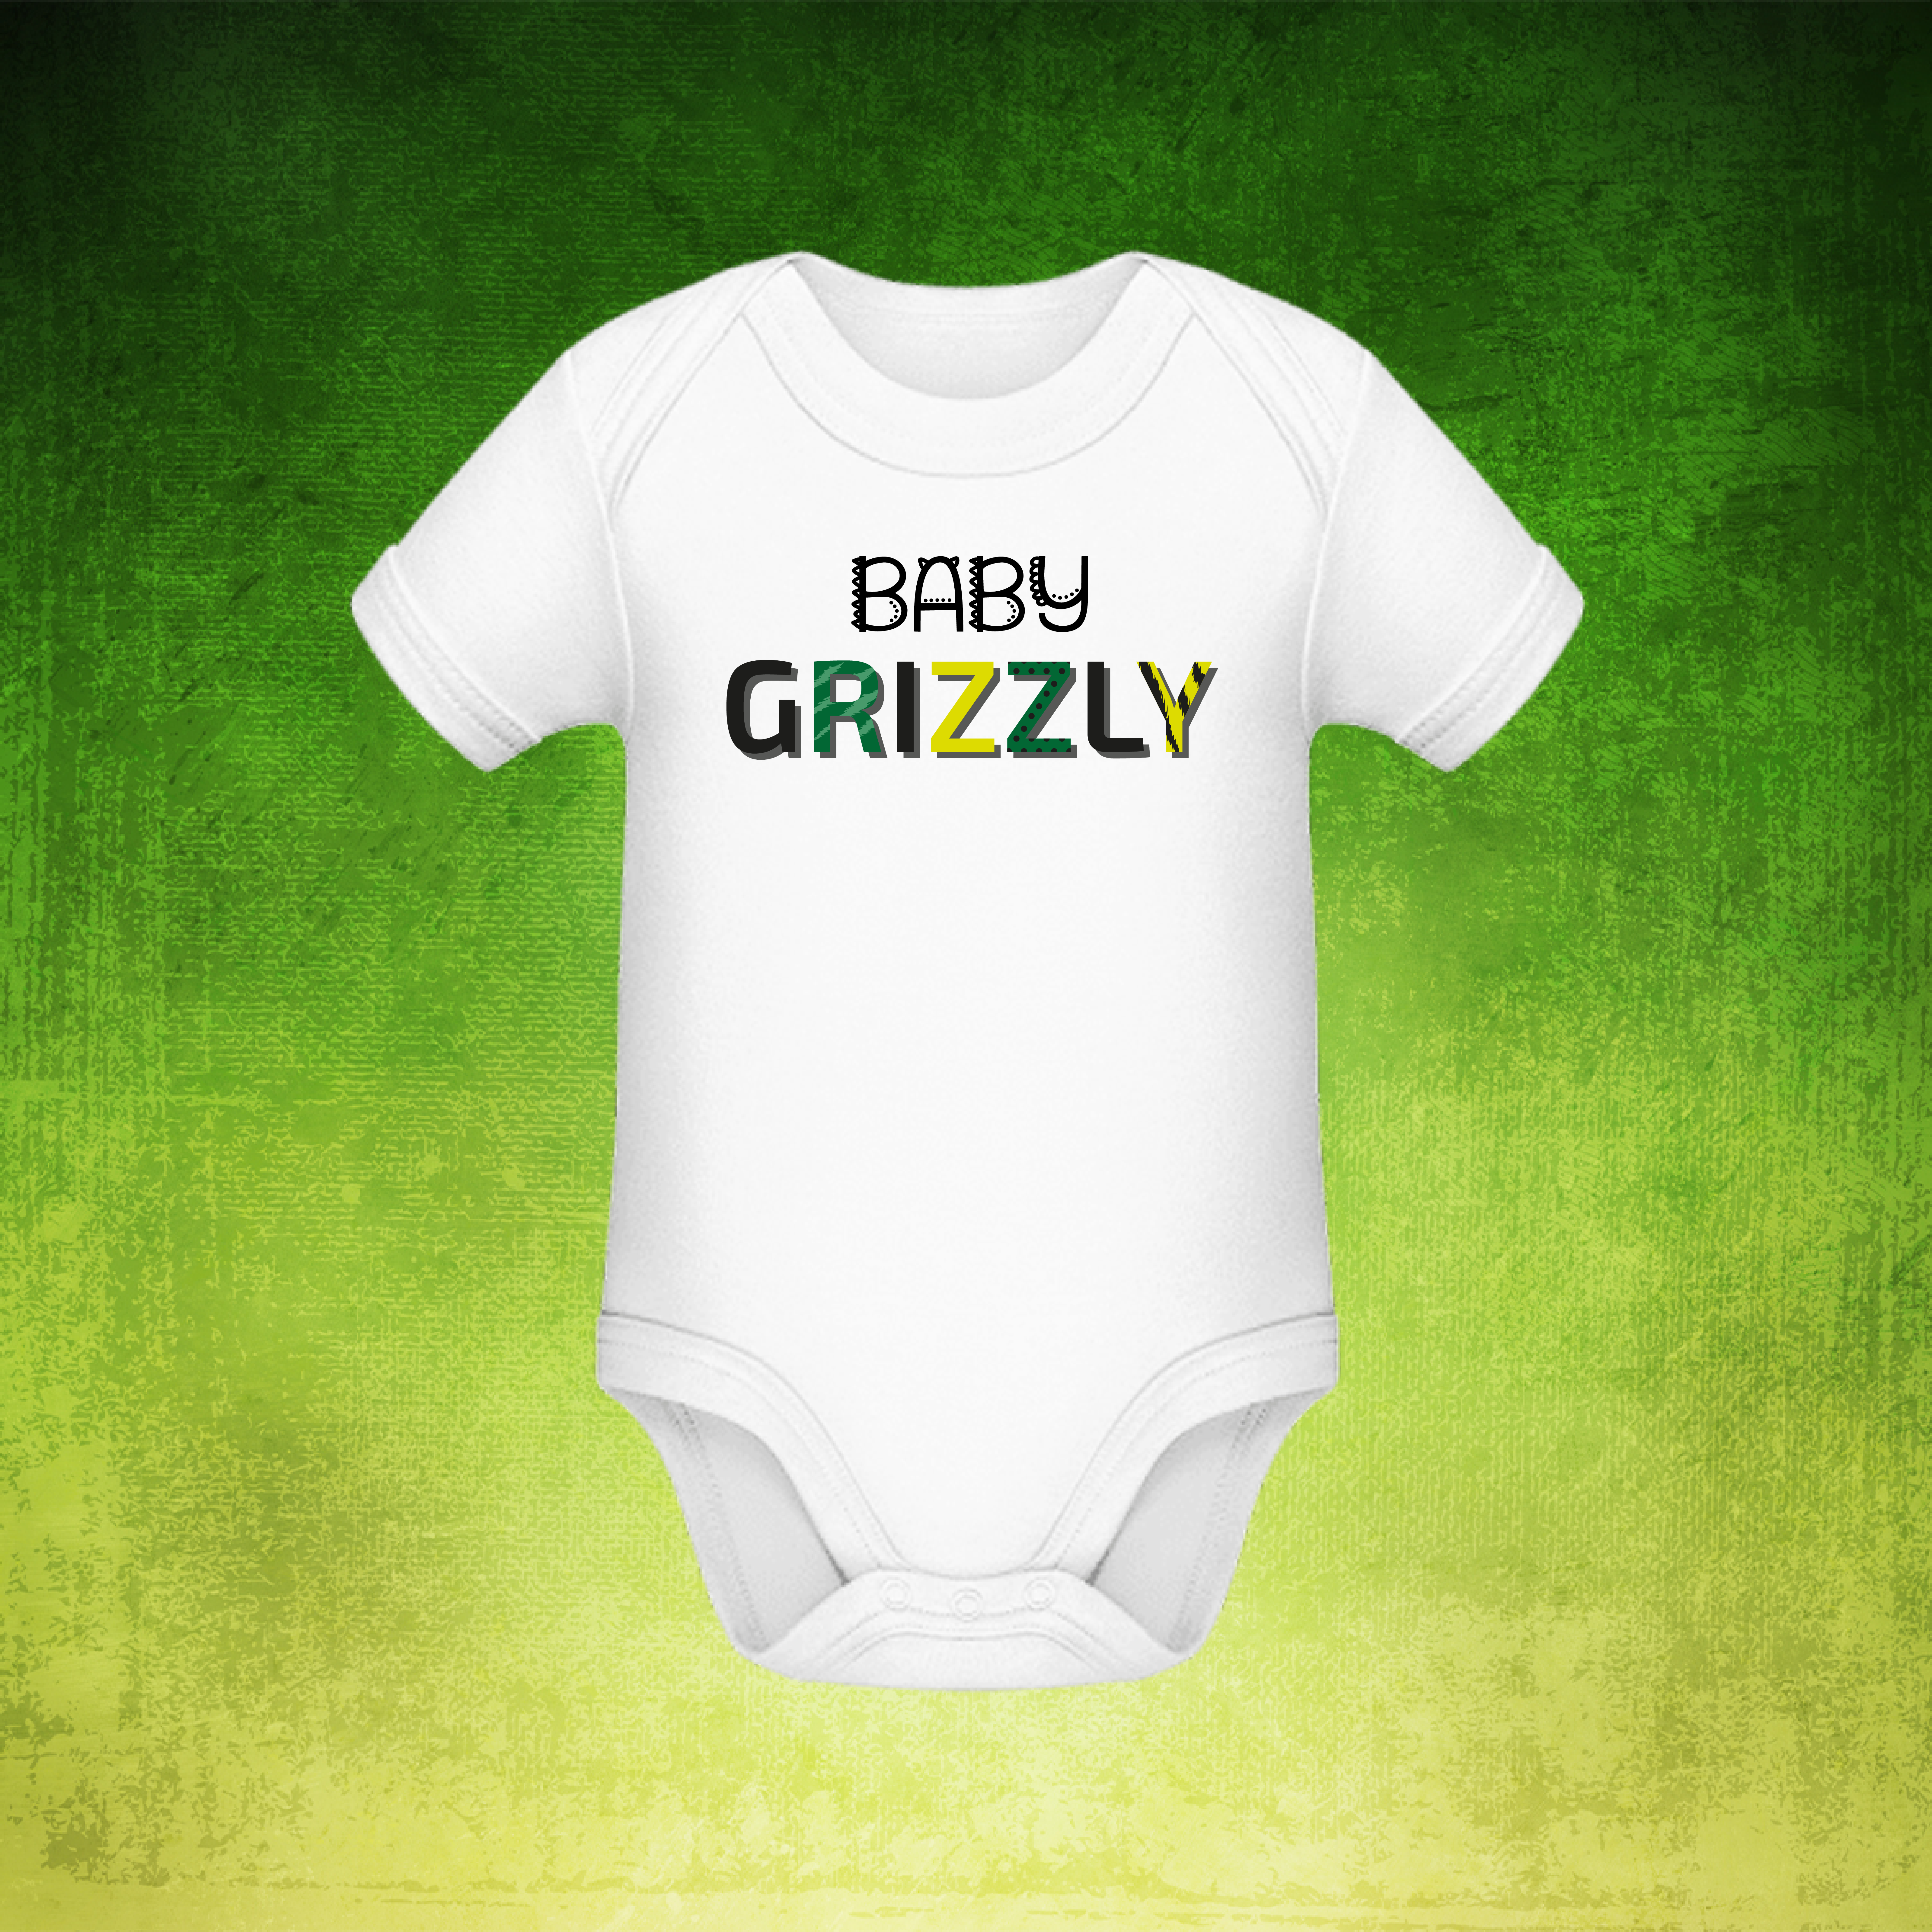 Baby Strampler Weiss Grizzly